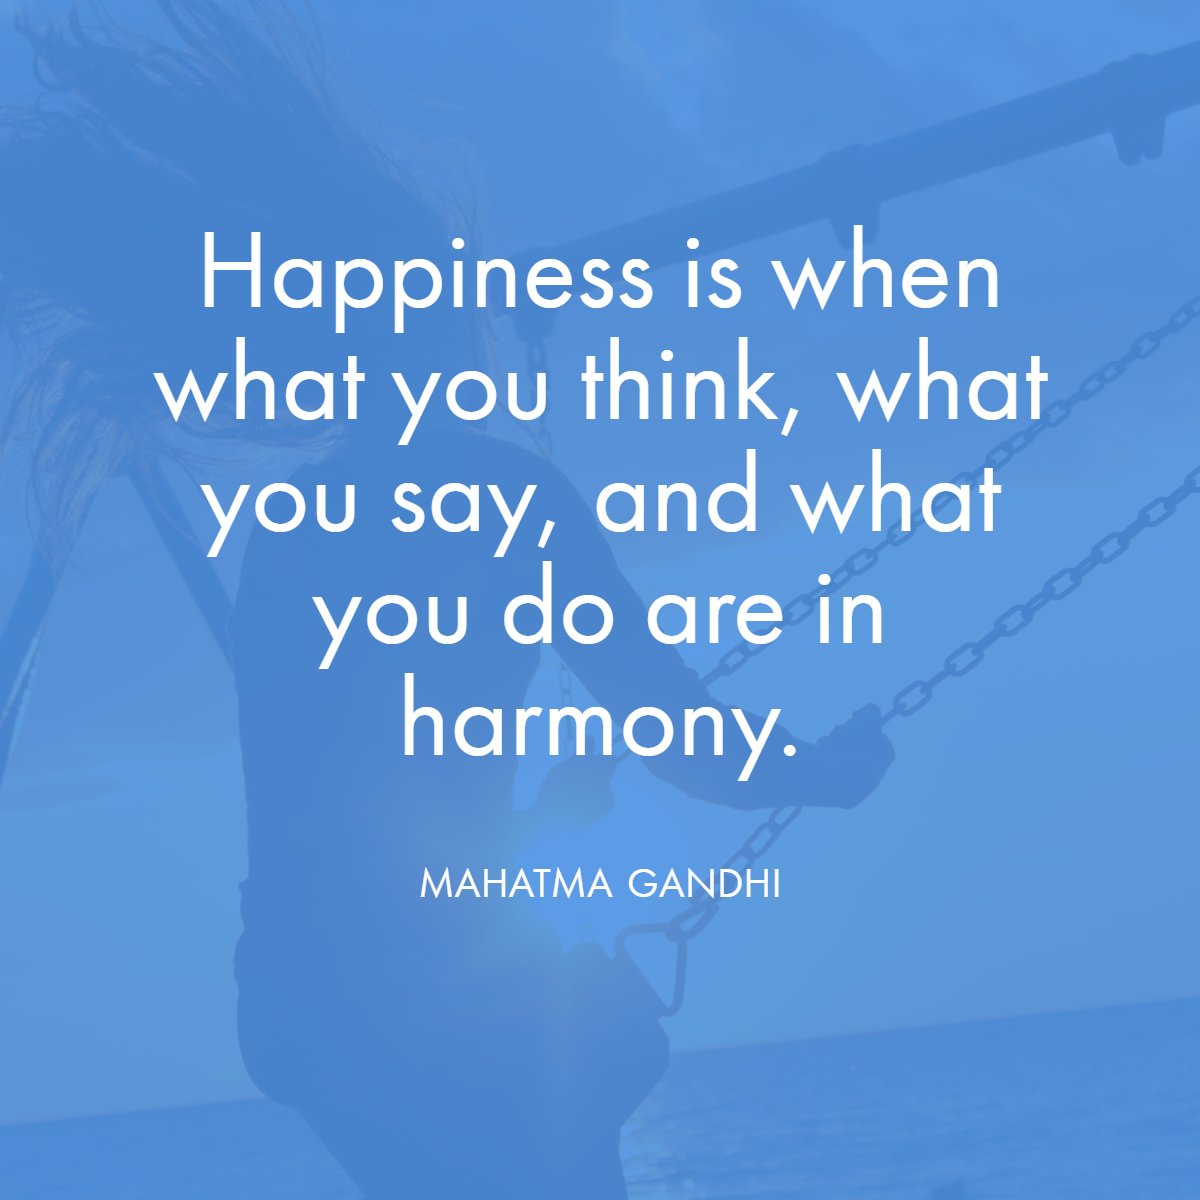 'Happiness is when what you think, what you say, and what you do are in harmony.' 
— Mahatma Gandhi 🤗

#happinesss #choosehappy #instaquote #wisdom #harmony #quoteoftheday #mahatmagandhi
 #LPTRealty #lptfam #lpttexas #htownrealestate #ctxrealestate #ctxguy